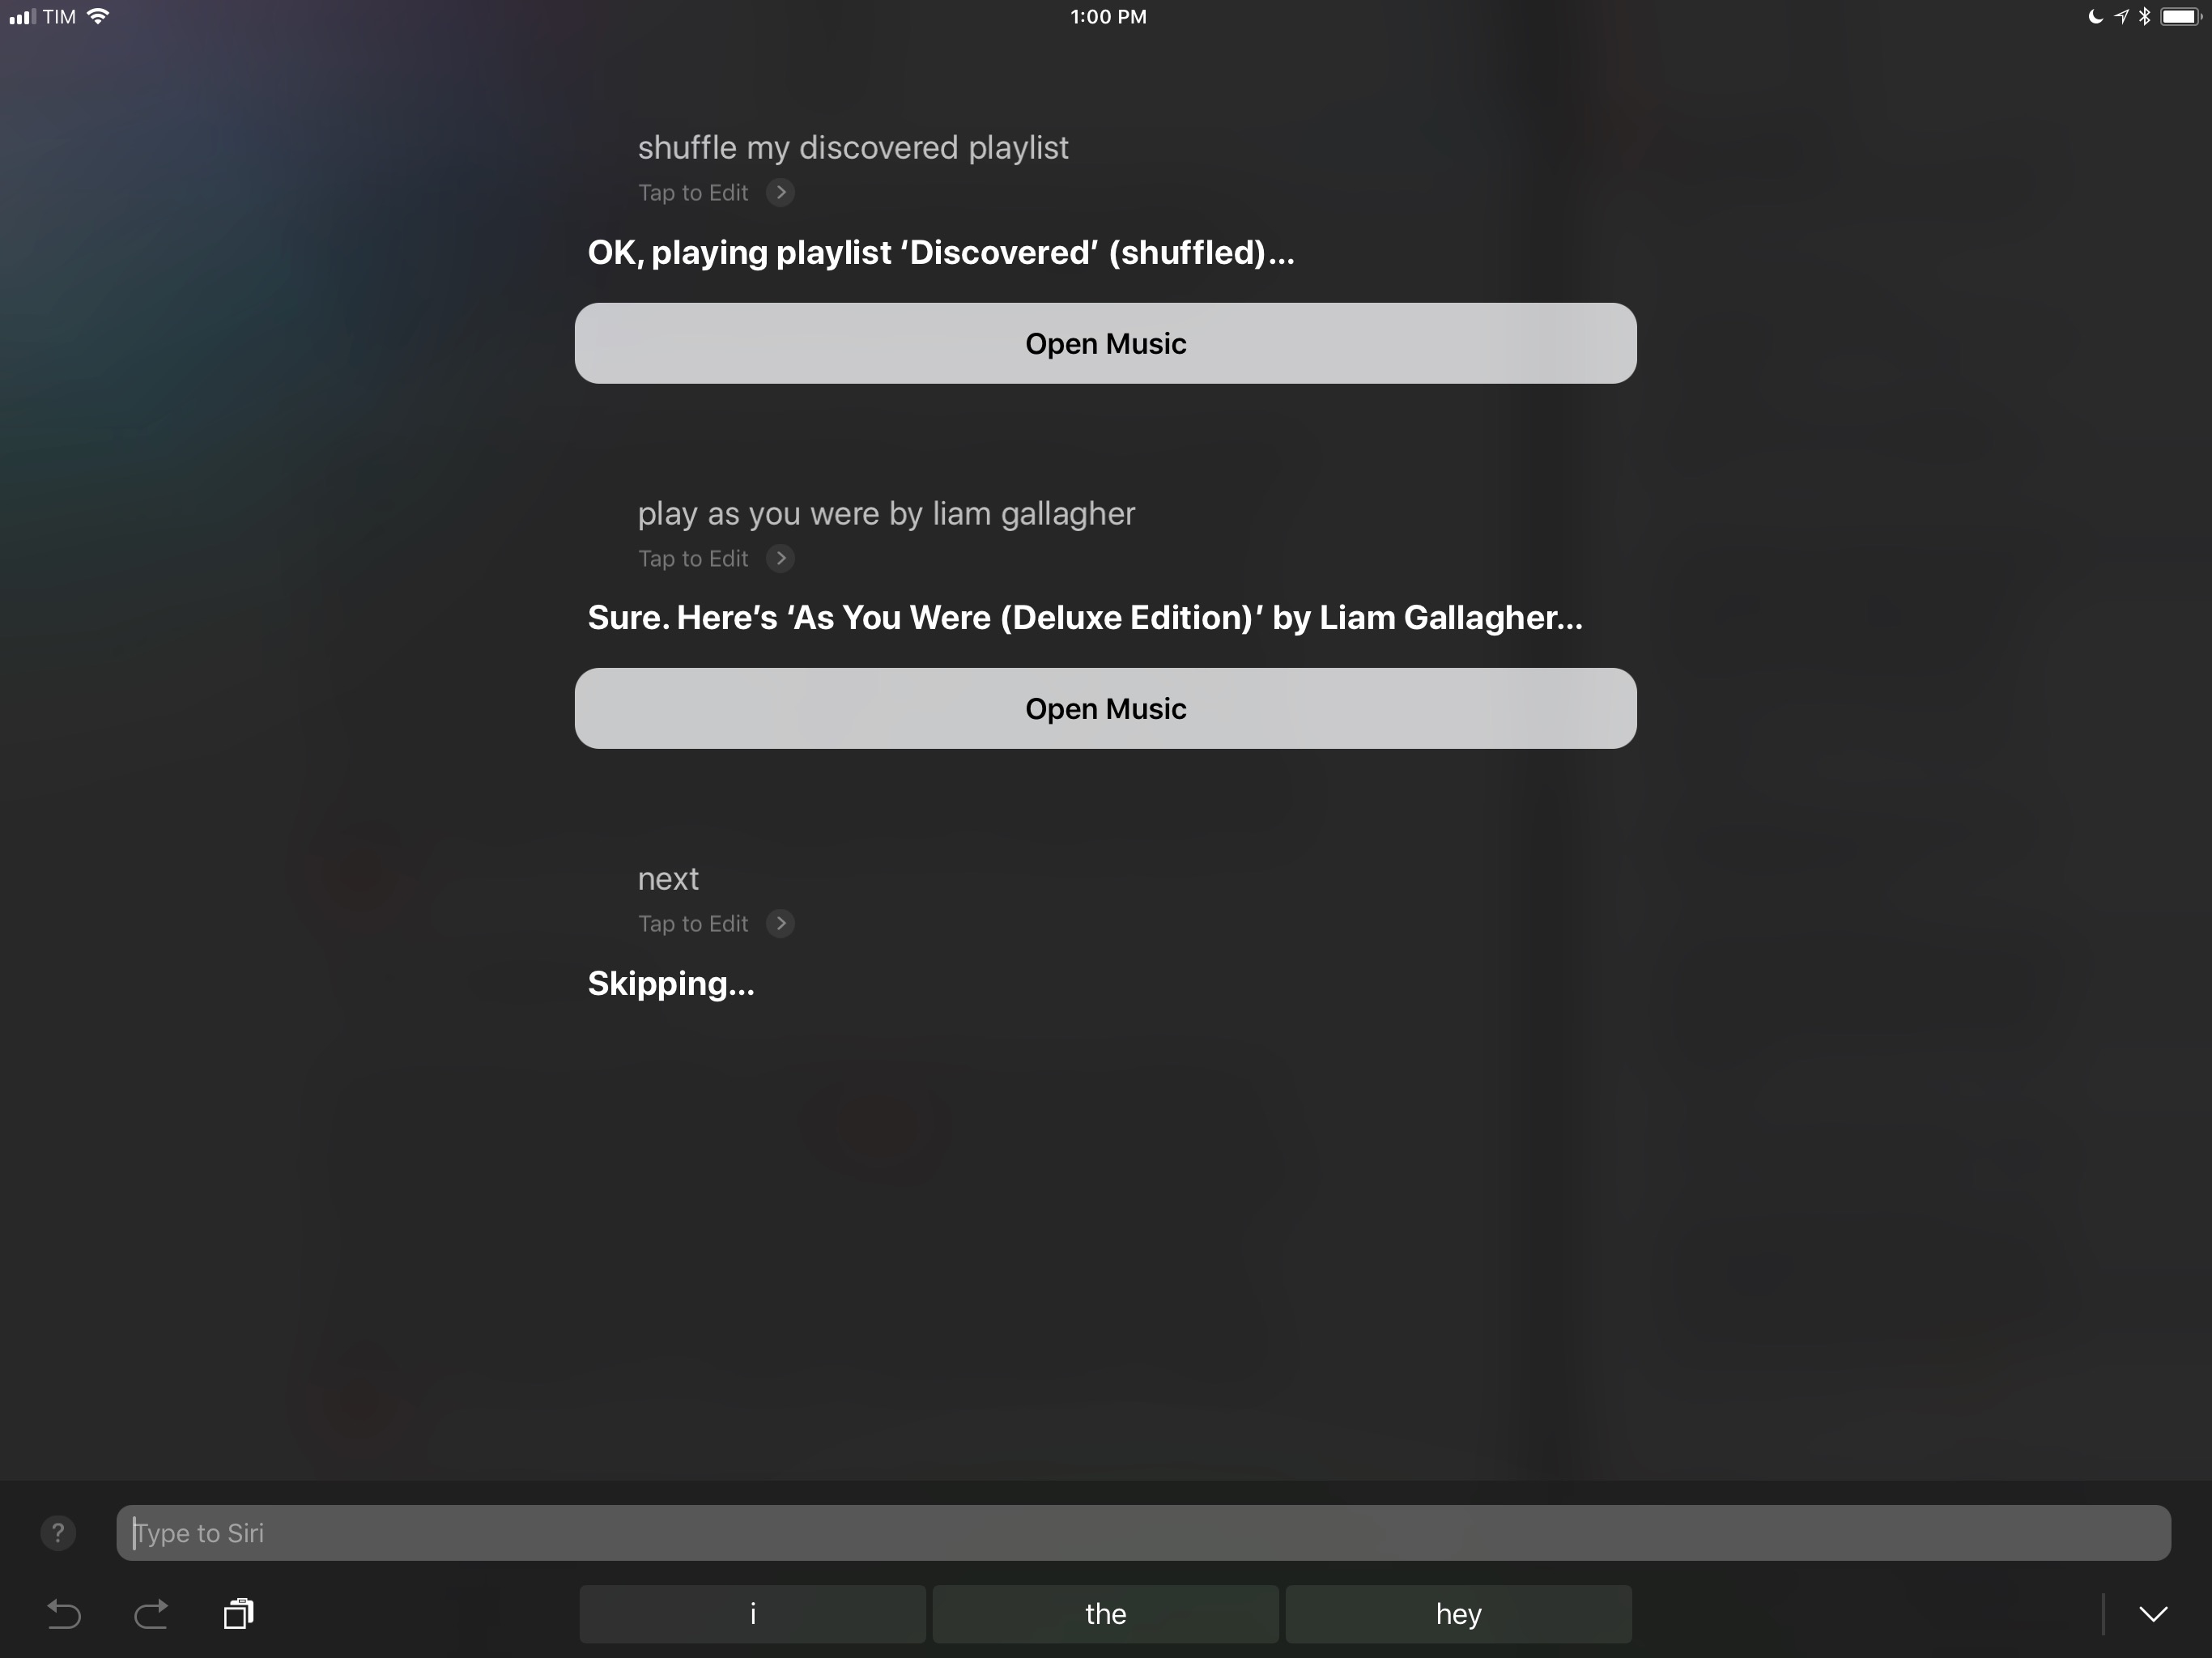 Controlling music playback with Type to Siri.